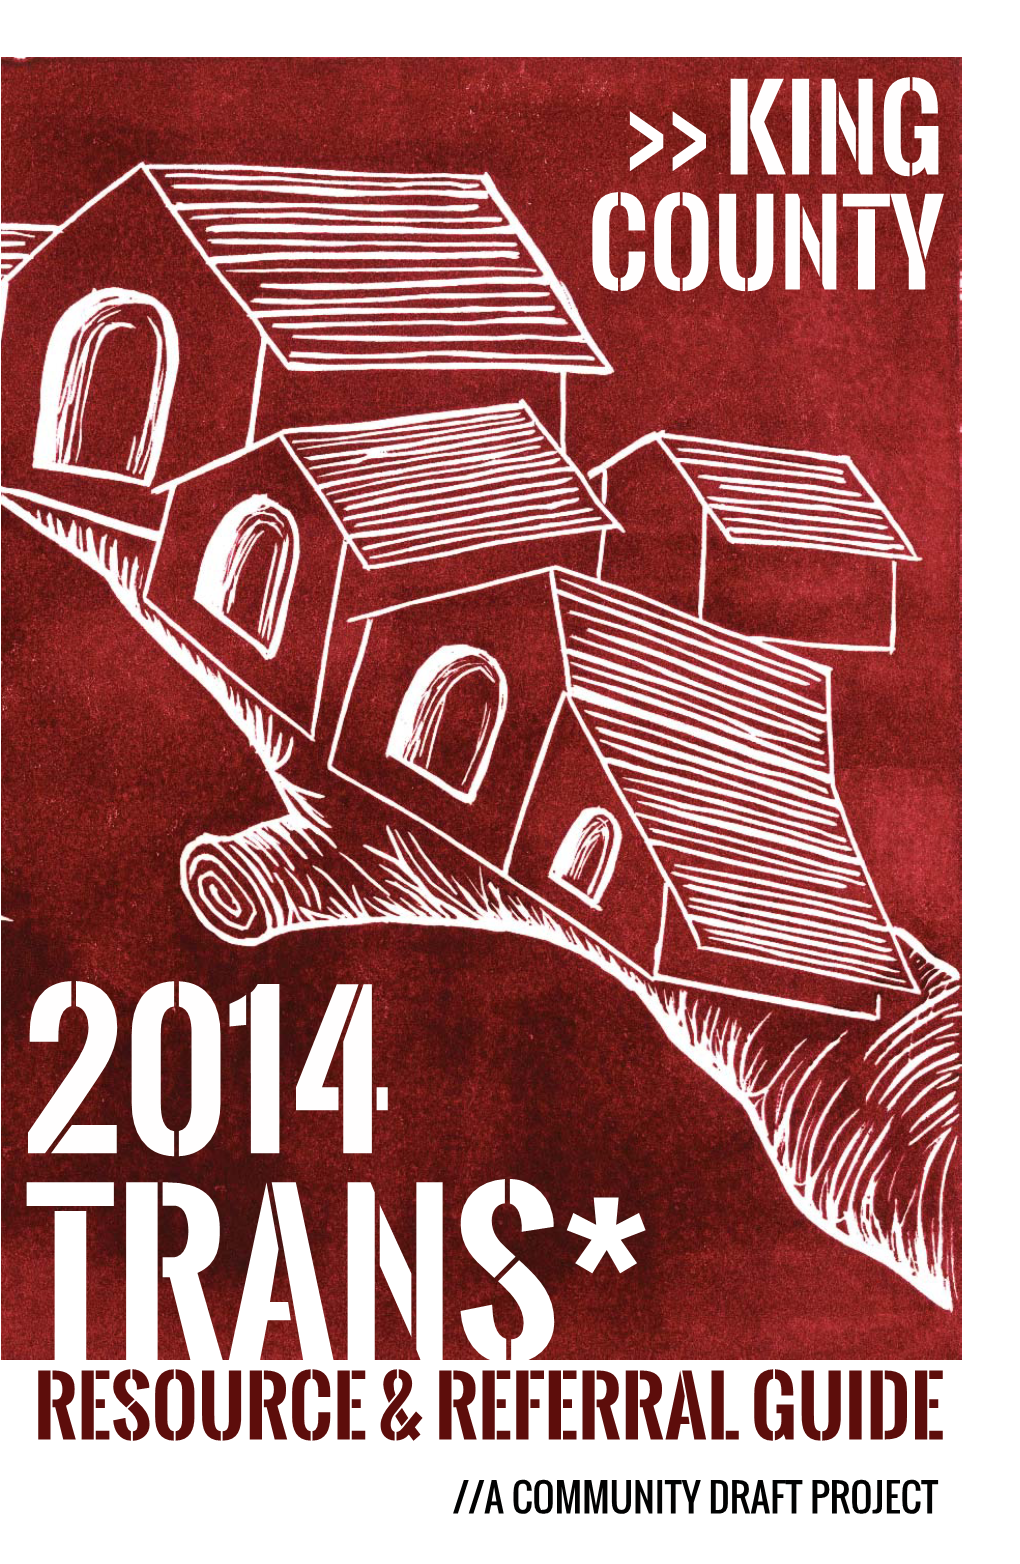 King County Trans* Resource & Referral Guide